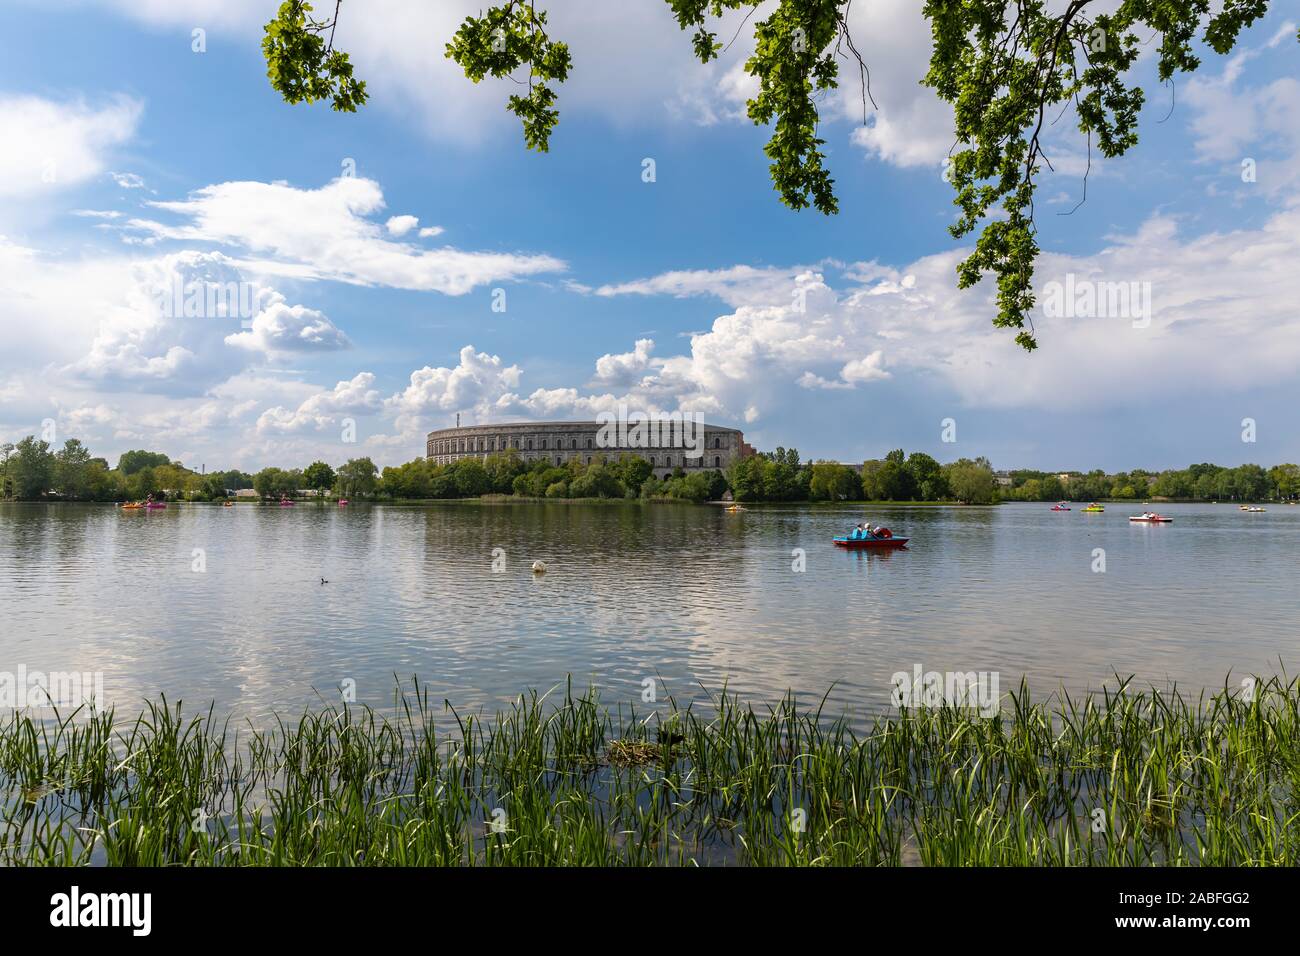 Panorama view of the Documentation Center and Congress Hall of the Nazi Party Rally Grounds in Nuremberg, with the Dutzendteich lake in the foreground Stock Photo